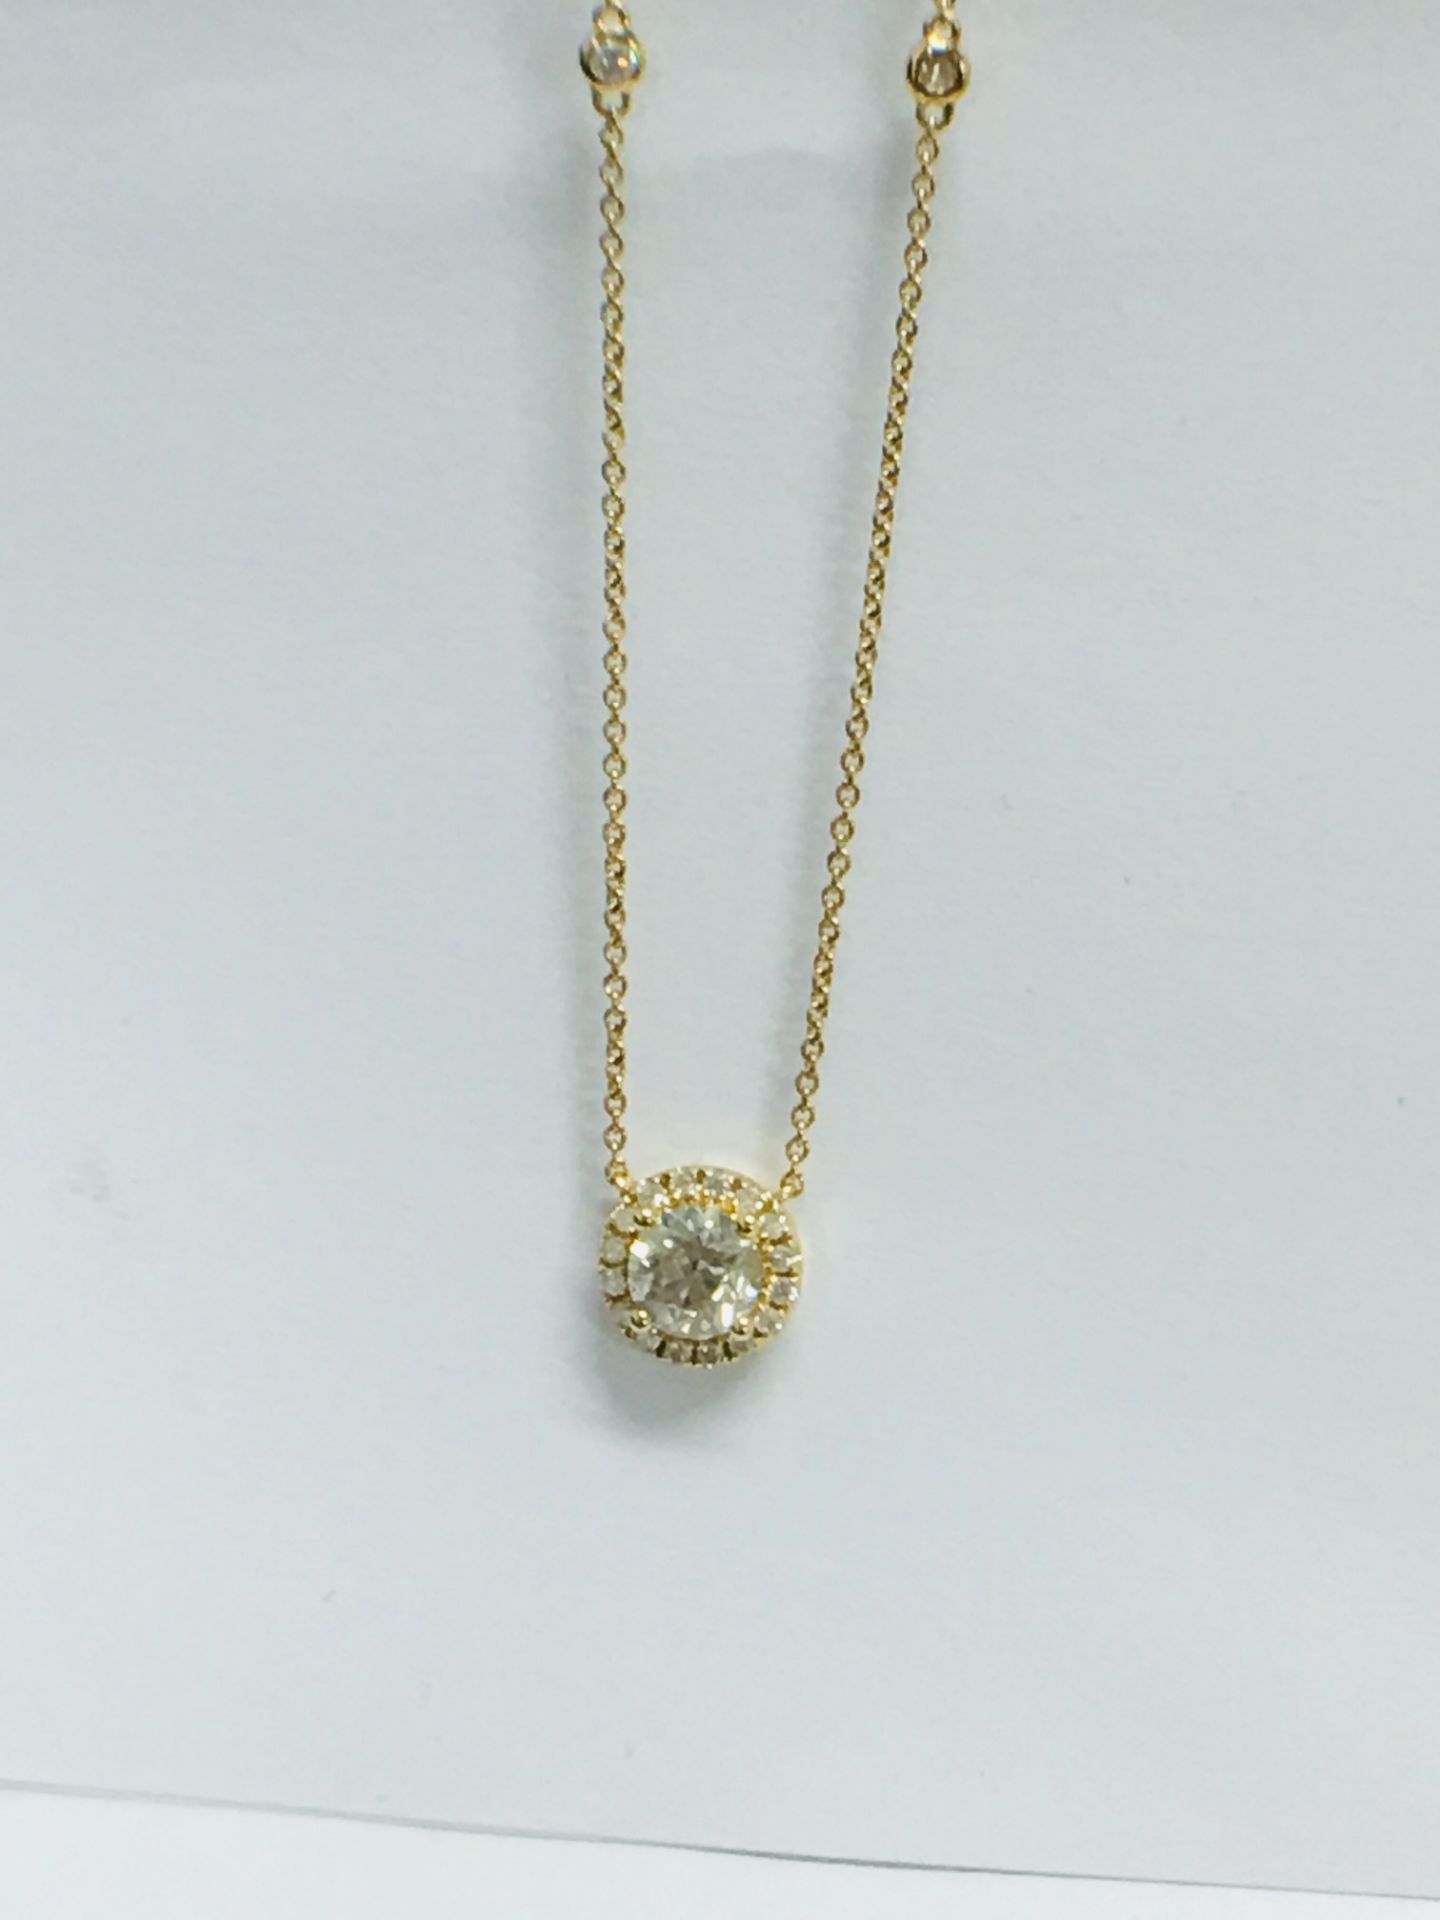 18ct Yellow Gold Diamond Necklace - Image 9 of 10